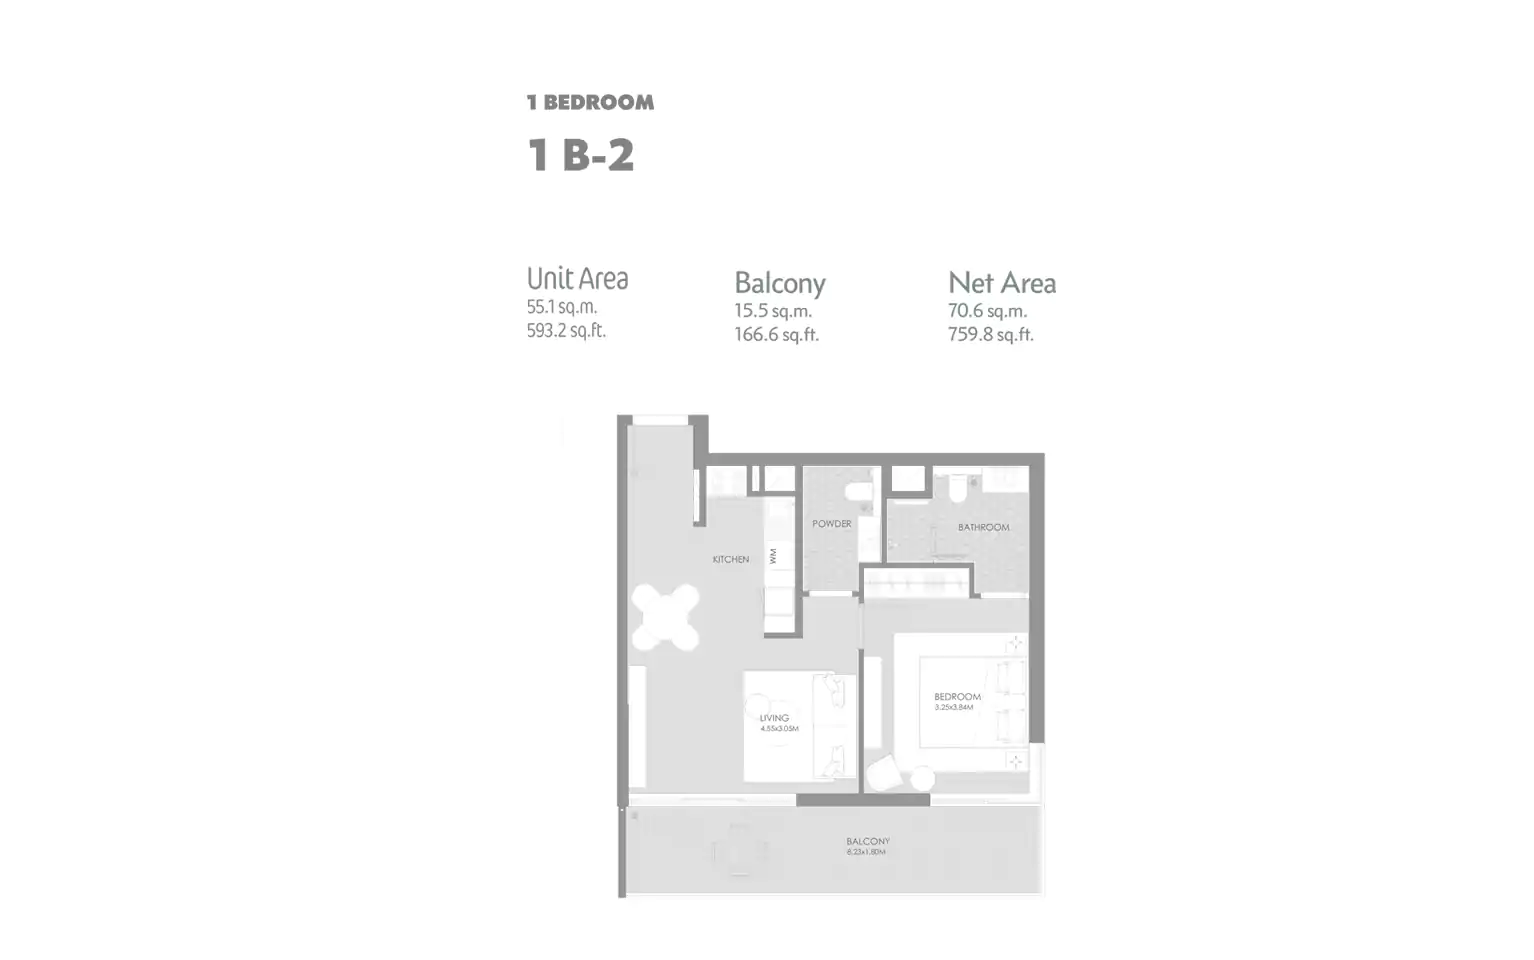 1 Bedroom with Balcony B-2, Size : 593.2 Sq.ft.